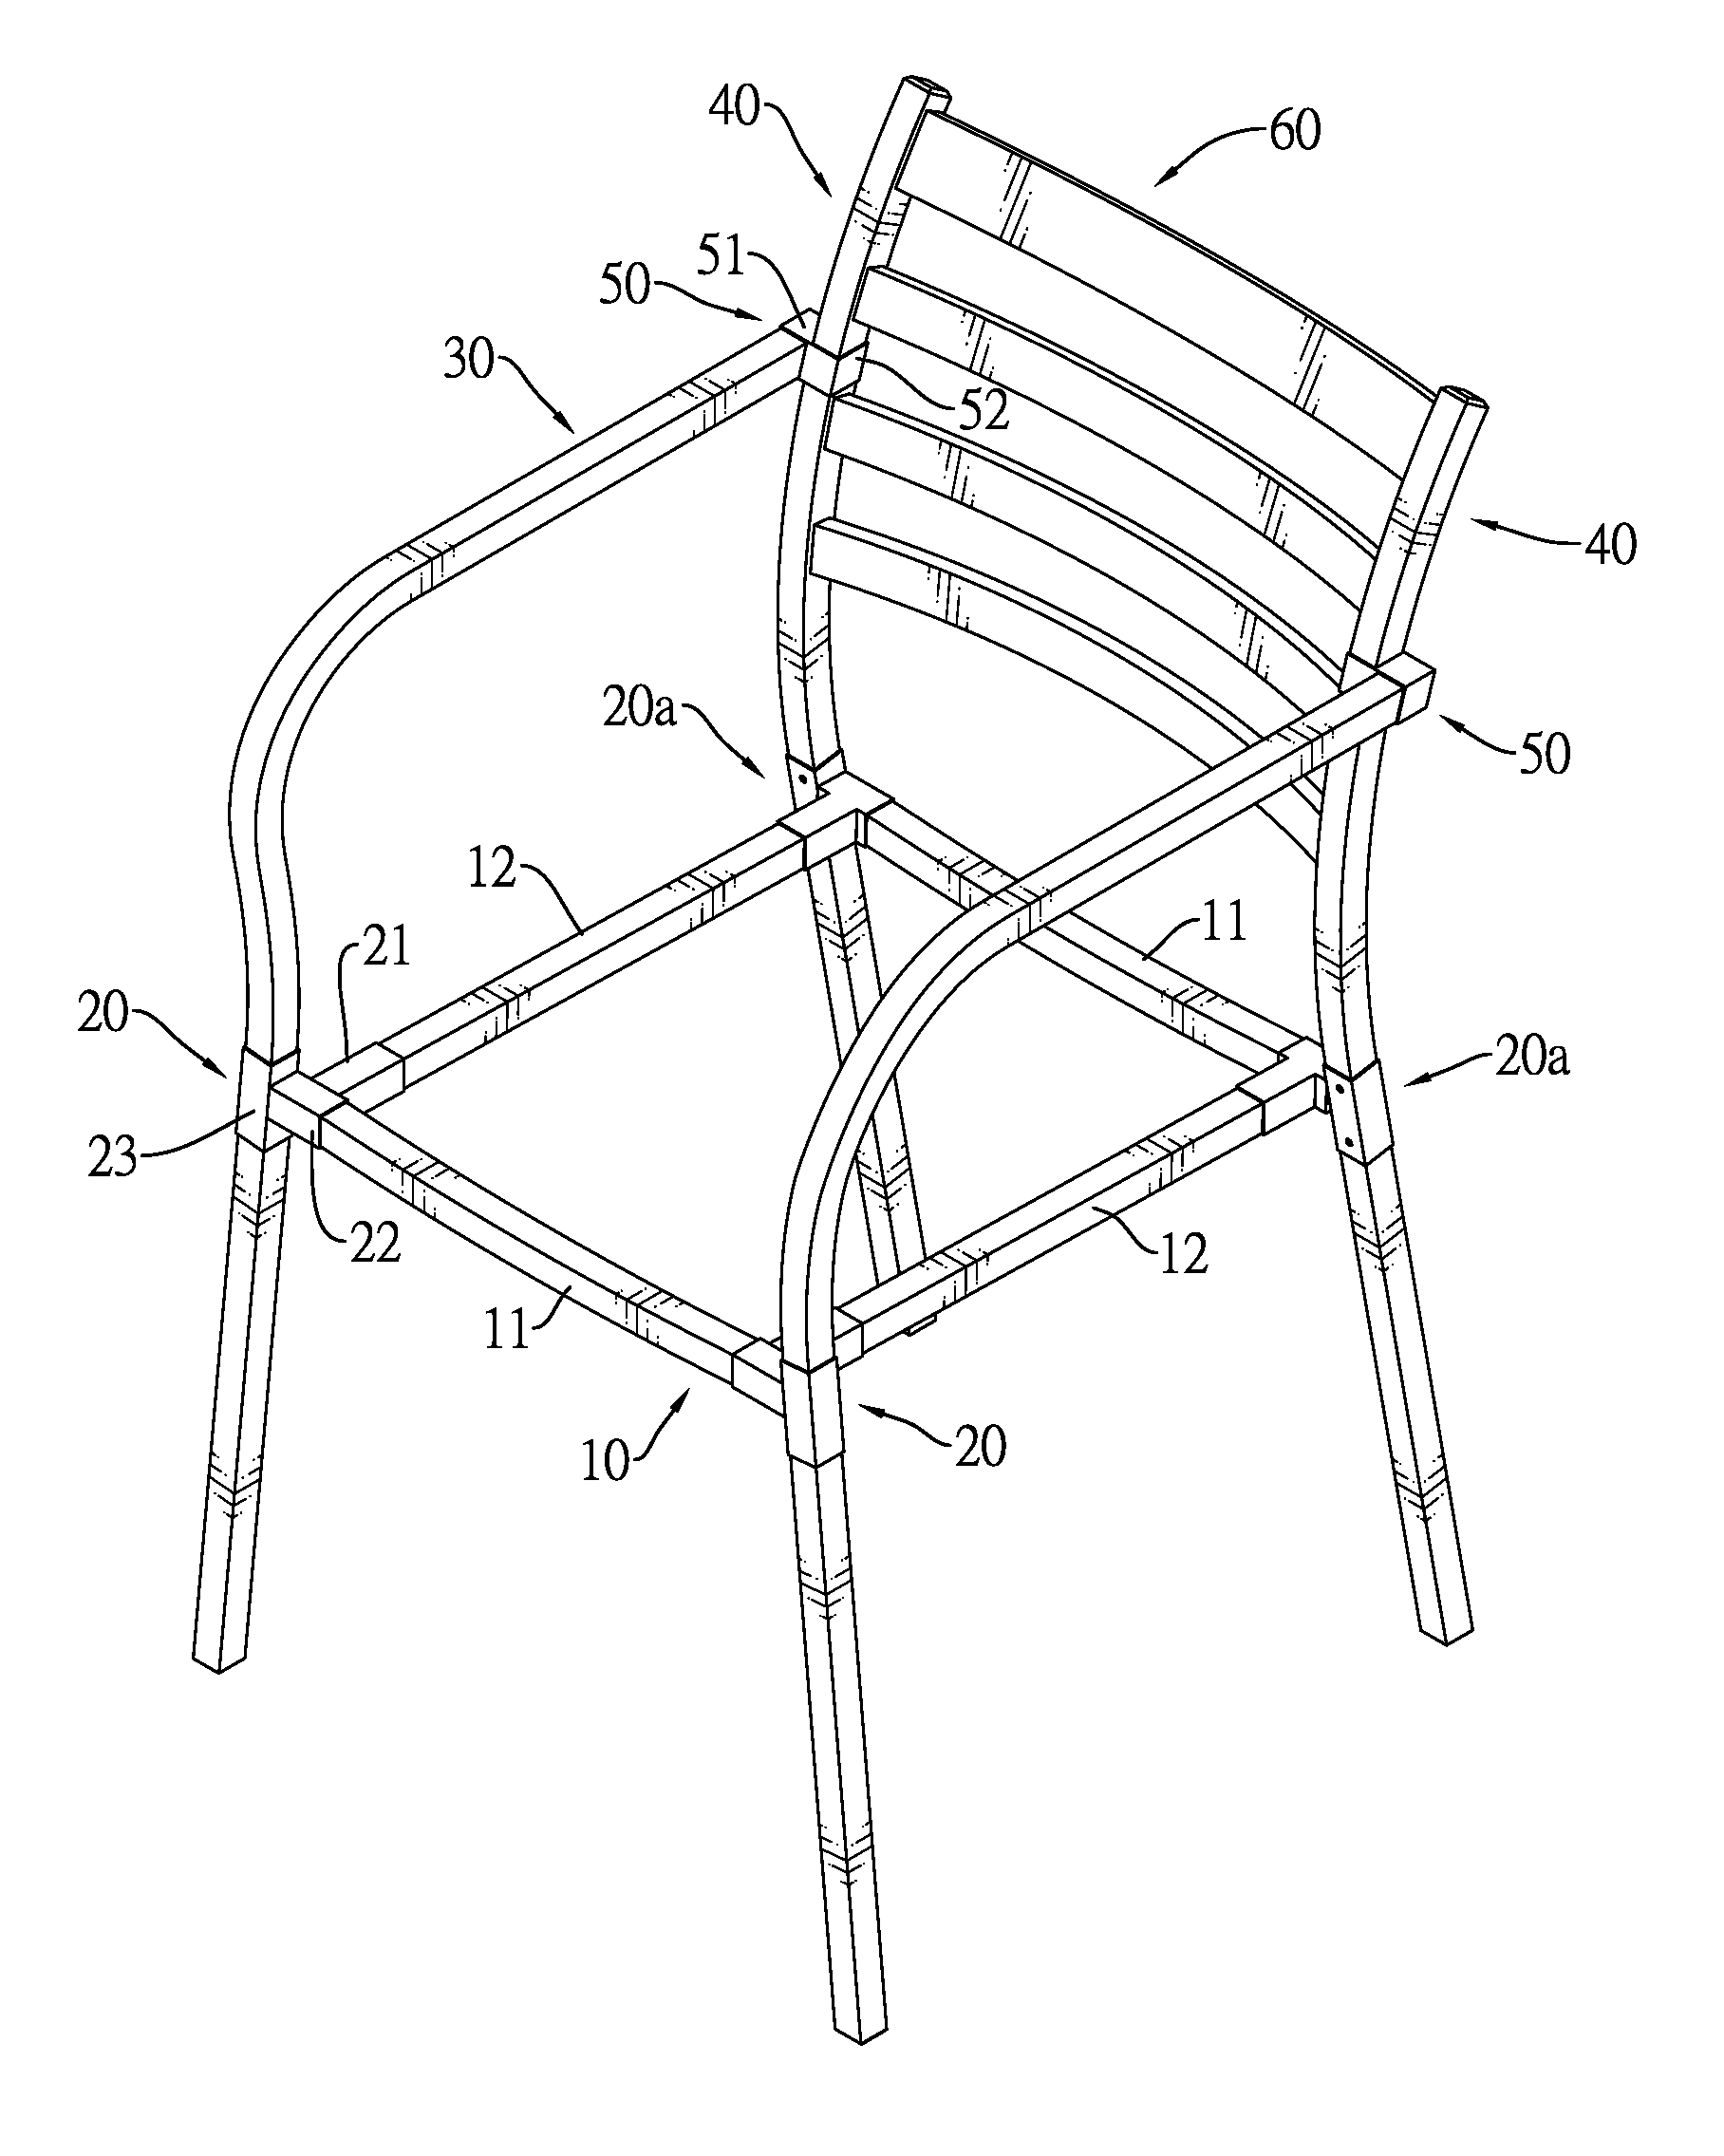 Chair assembly